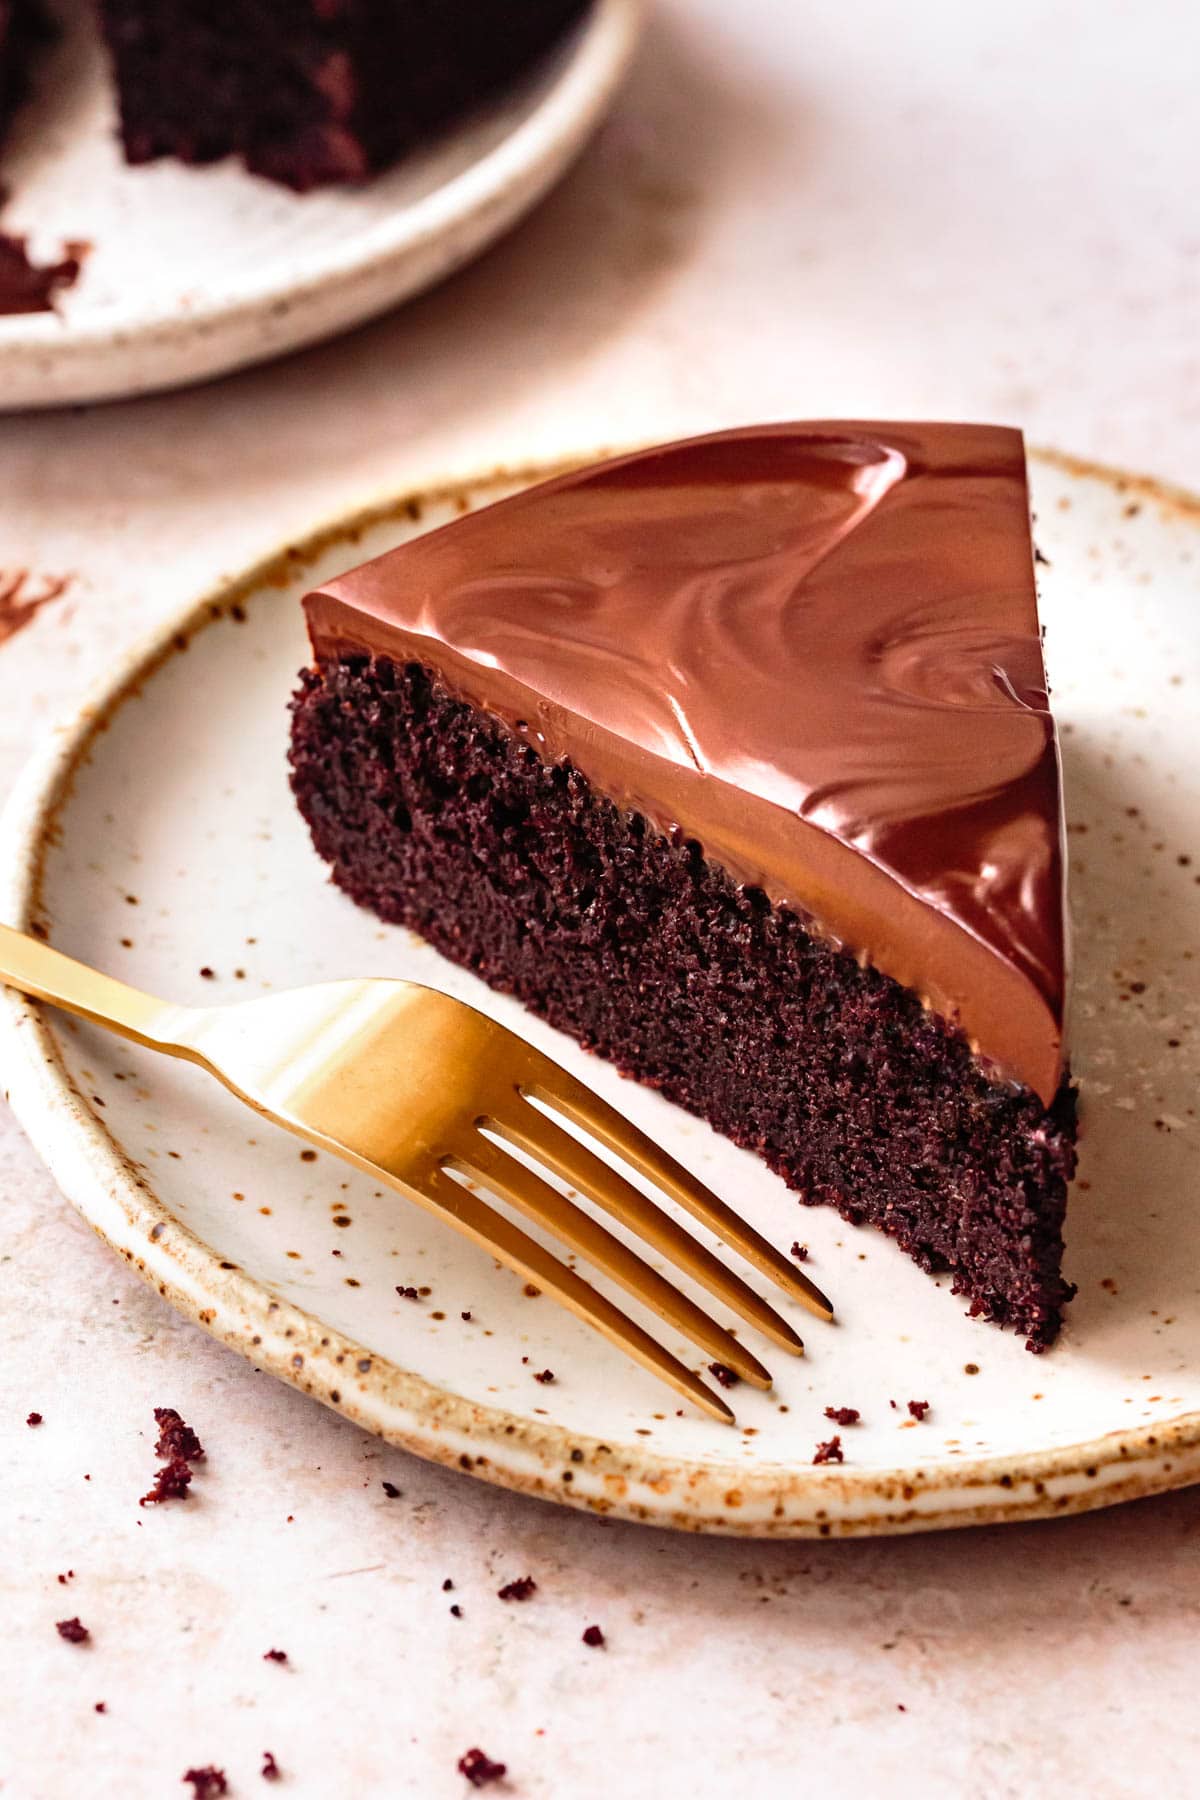 a handsome slice of chocolate cake crowned in coconut milk chocolate ganache sits on a speckled beige plate with a gold fork ready to dig in